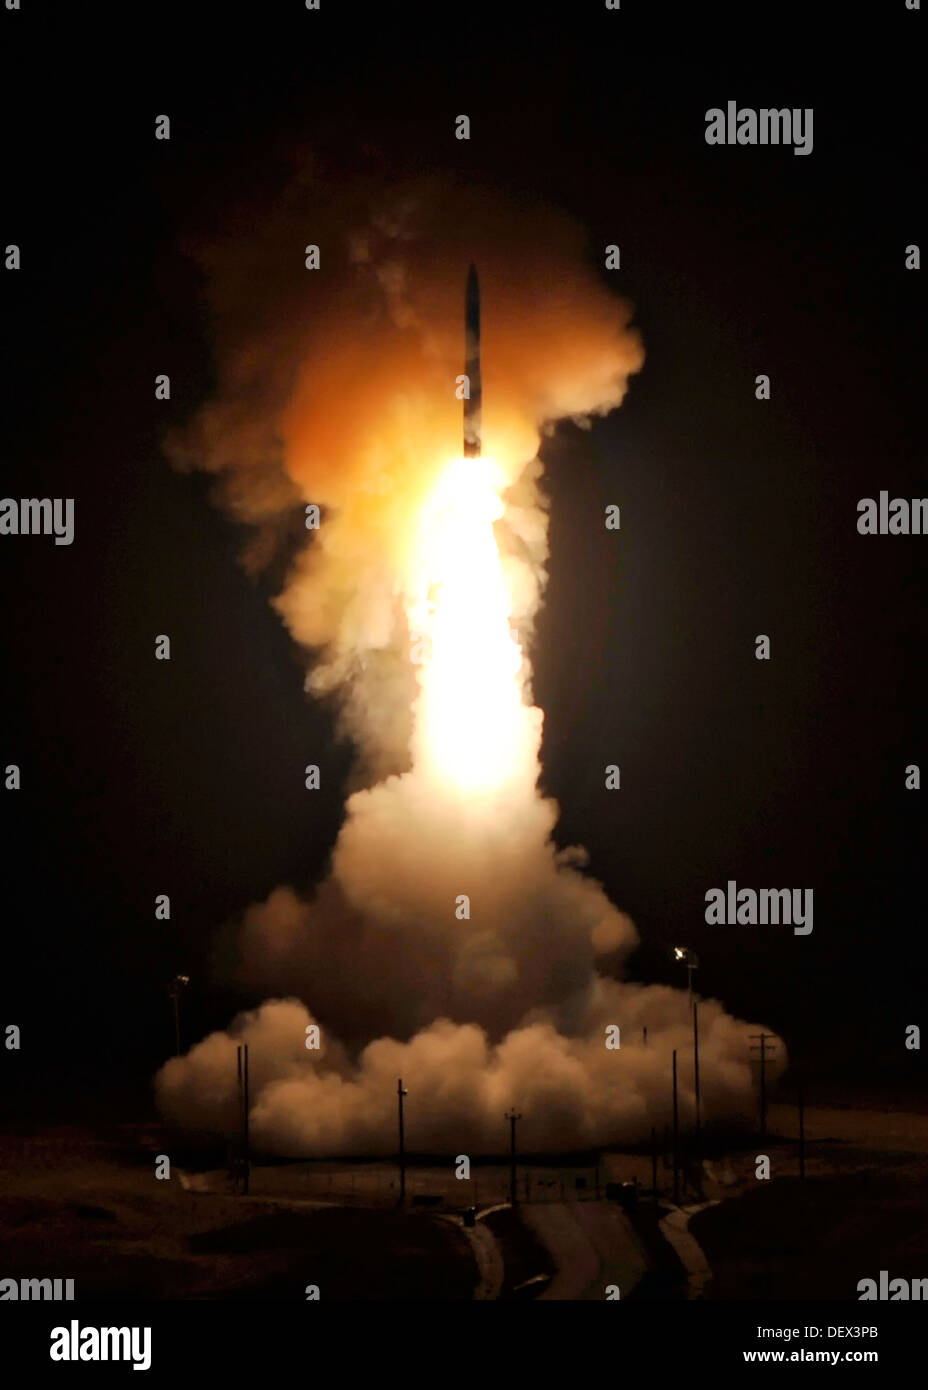 An Air Force Global Strike Command Minuteman III intercontinental ballistic missile with a simulated warhead is launched during an operational test at September 22, 2013 from Launch Facility 10 Vandenberg, CA. Stock Photo